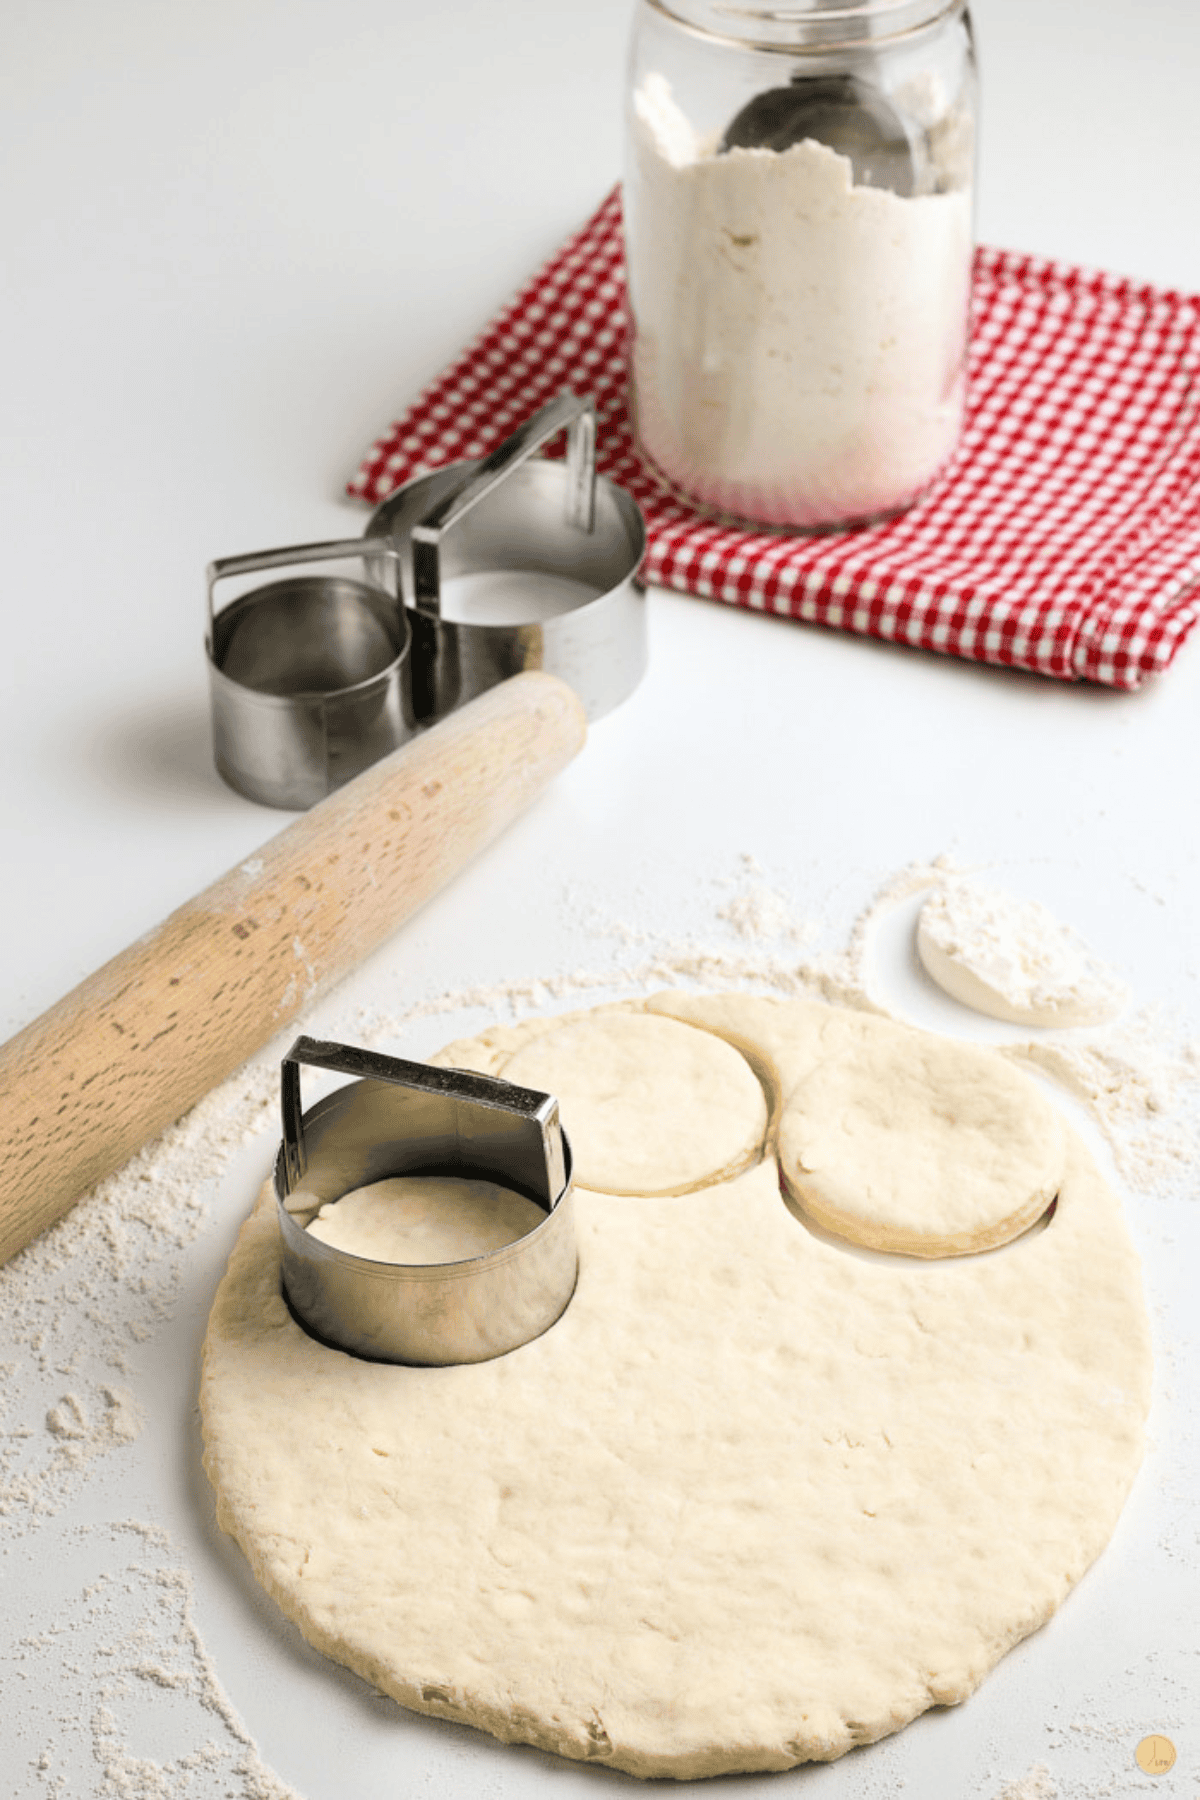 biscuit cutter cutting 3 biscuits out of dough